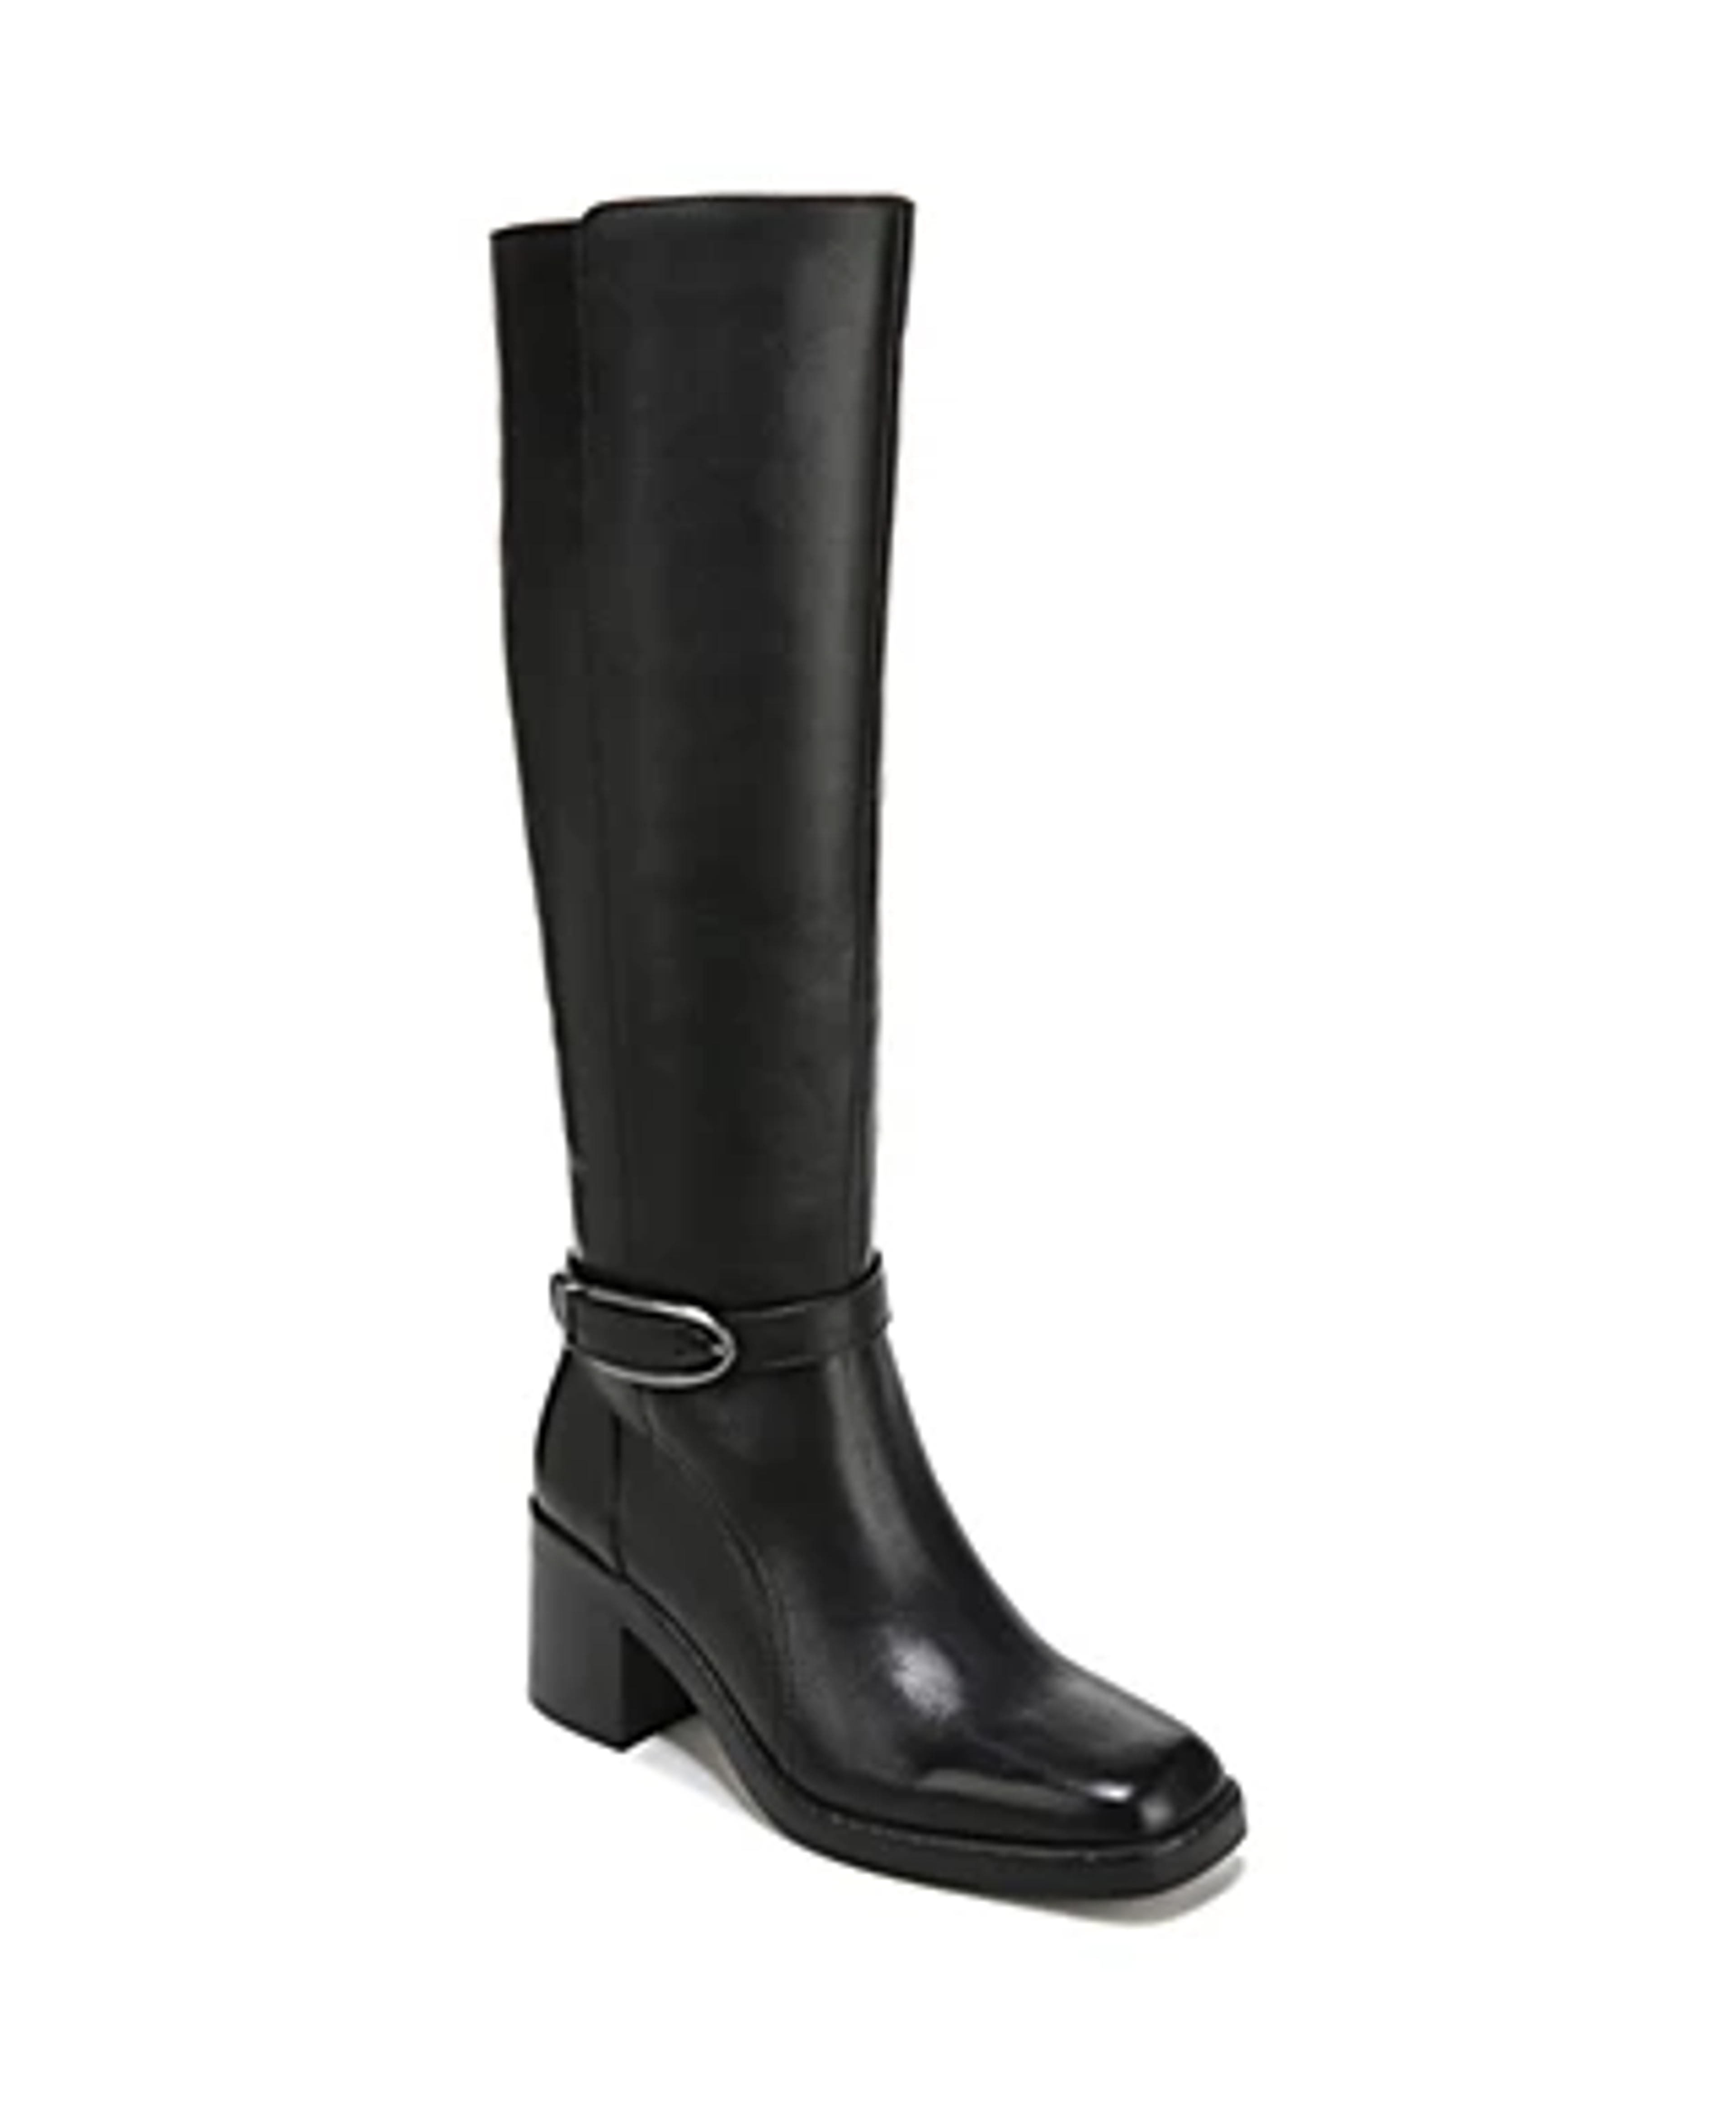 Naturalizer Elliot Wide Calf High Shaft Boots & Reviews - Boots - Shoes - Macy's